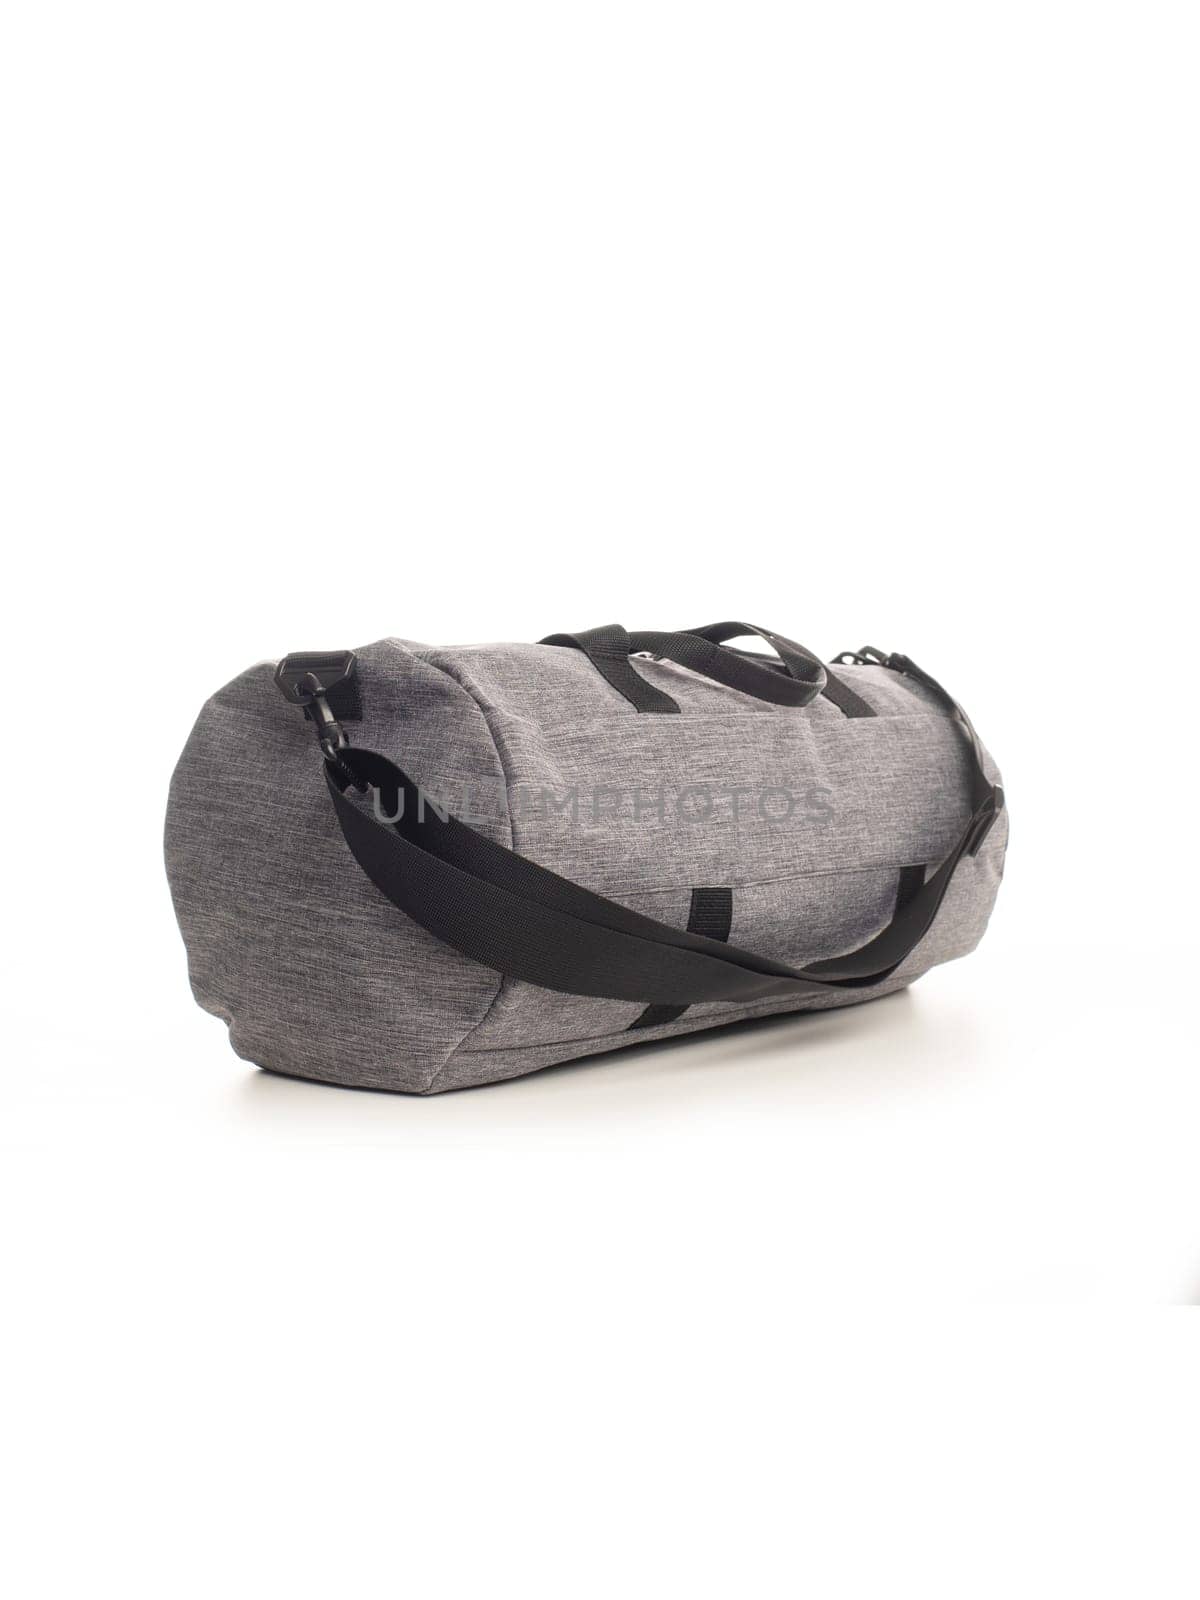 Sport bag isolated on the white background by zartarn